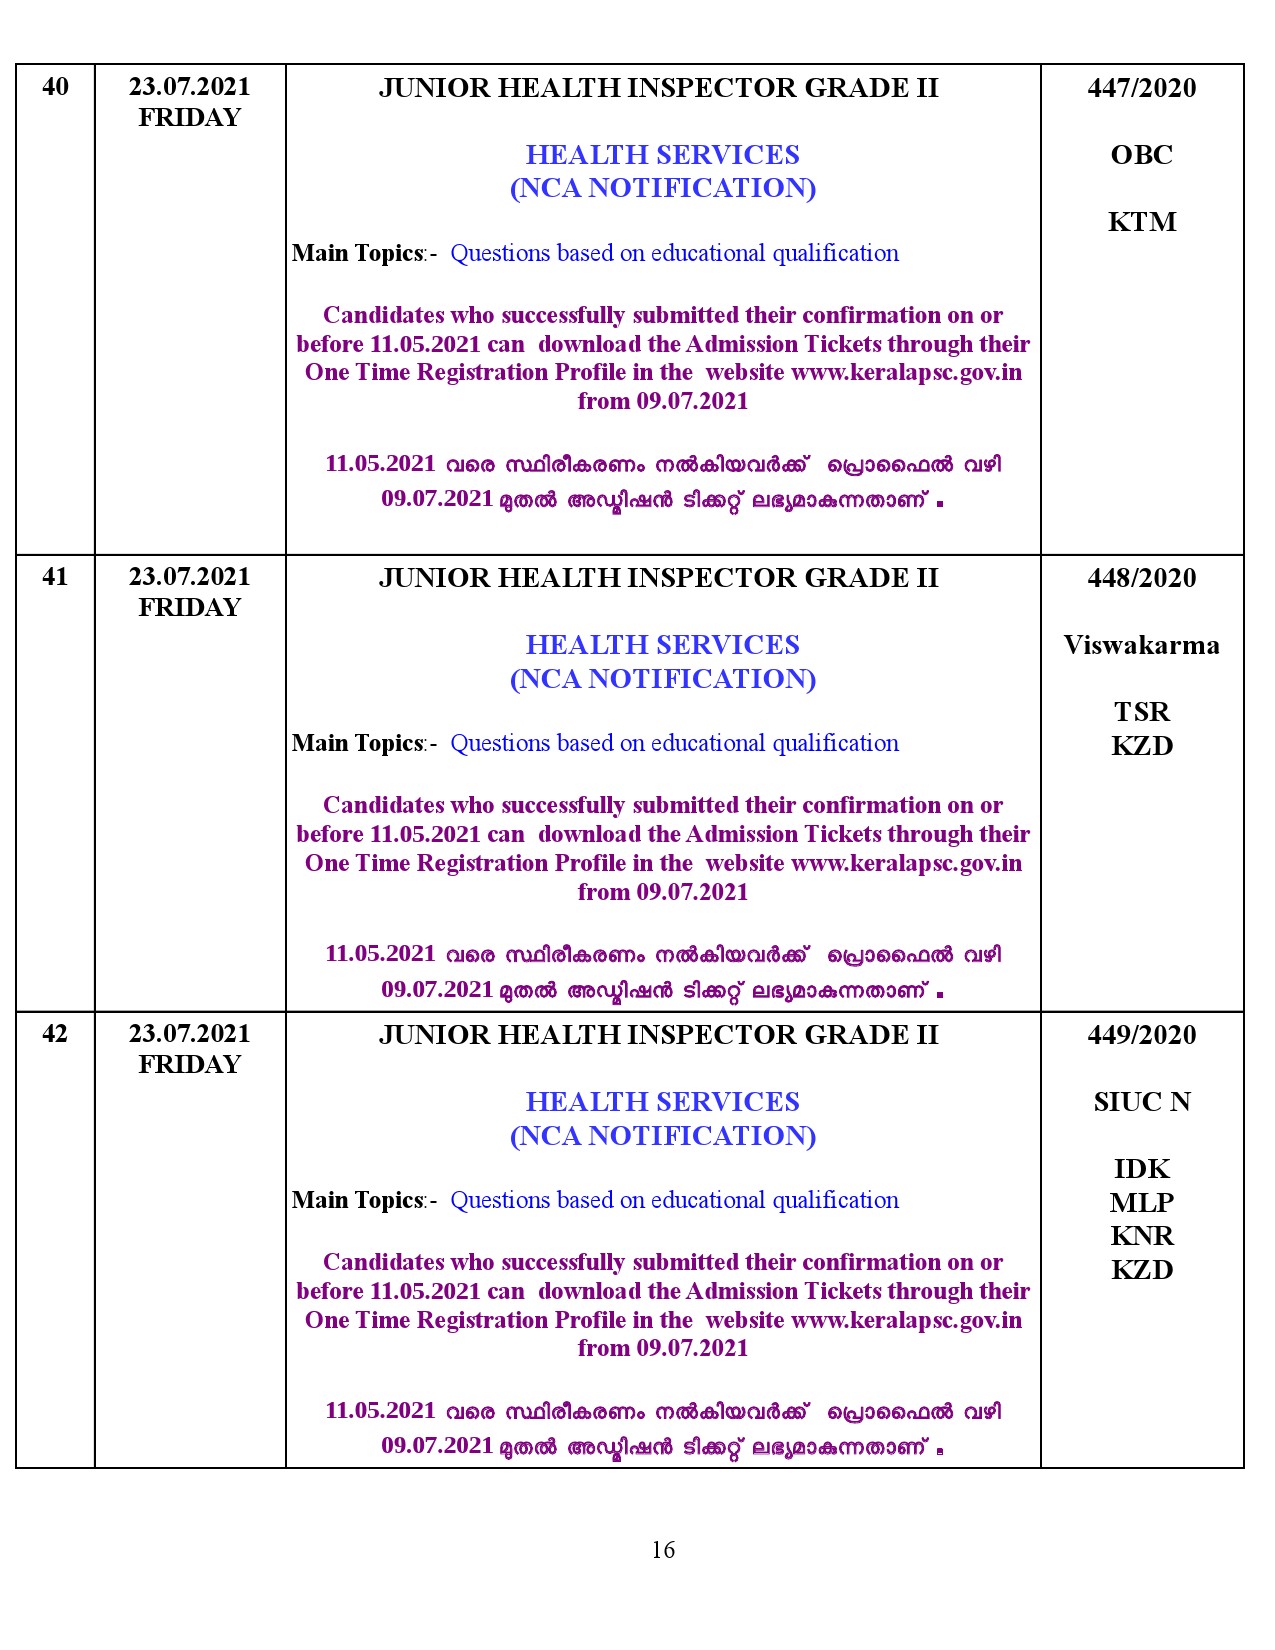 Examination Programme For The Month Of July 2021 - Notification Image 16